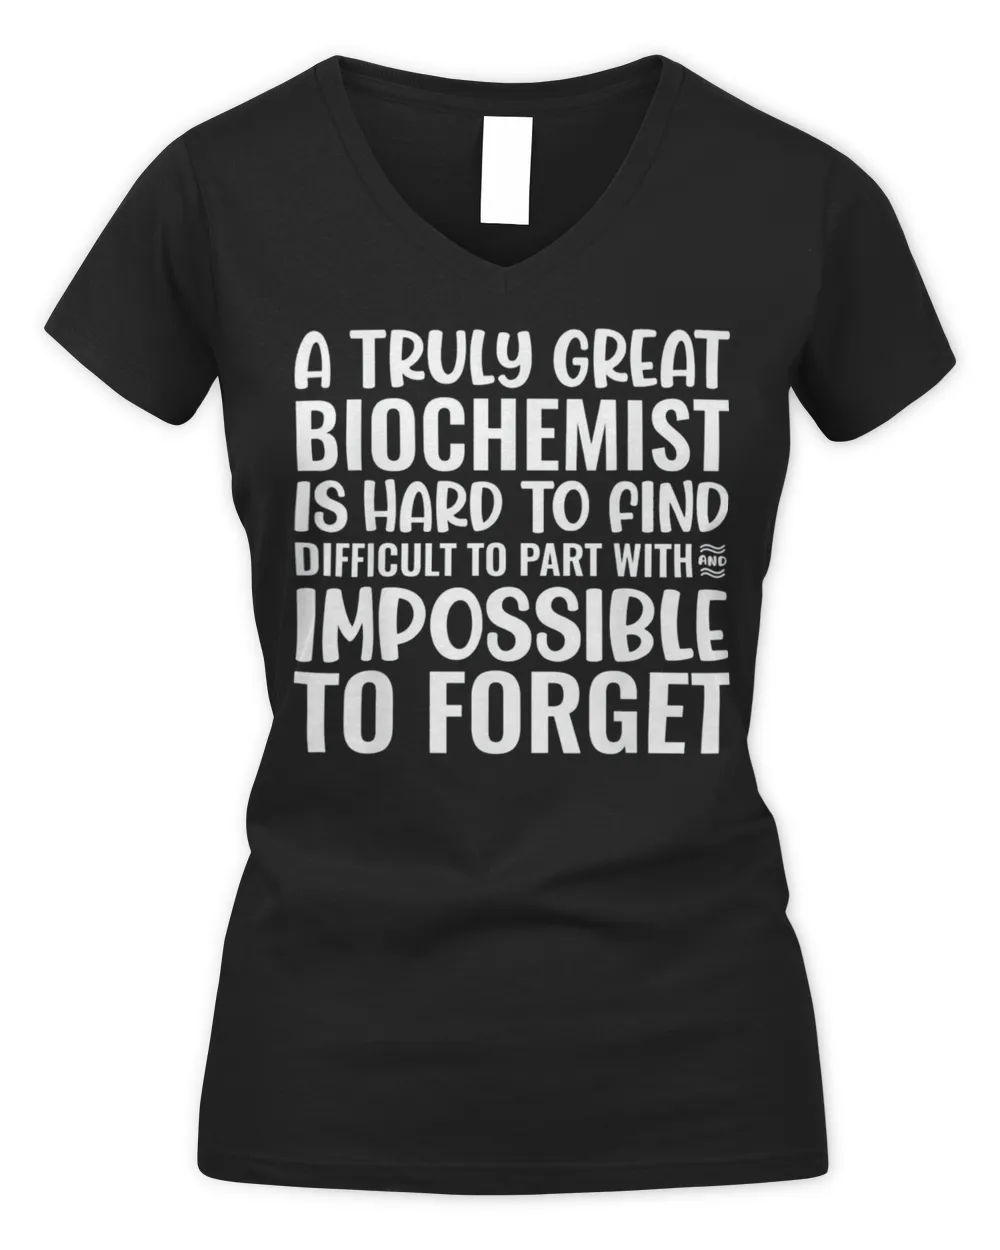 A Truly Great Biochemist Is Impossible To Forget Shirt